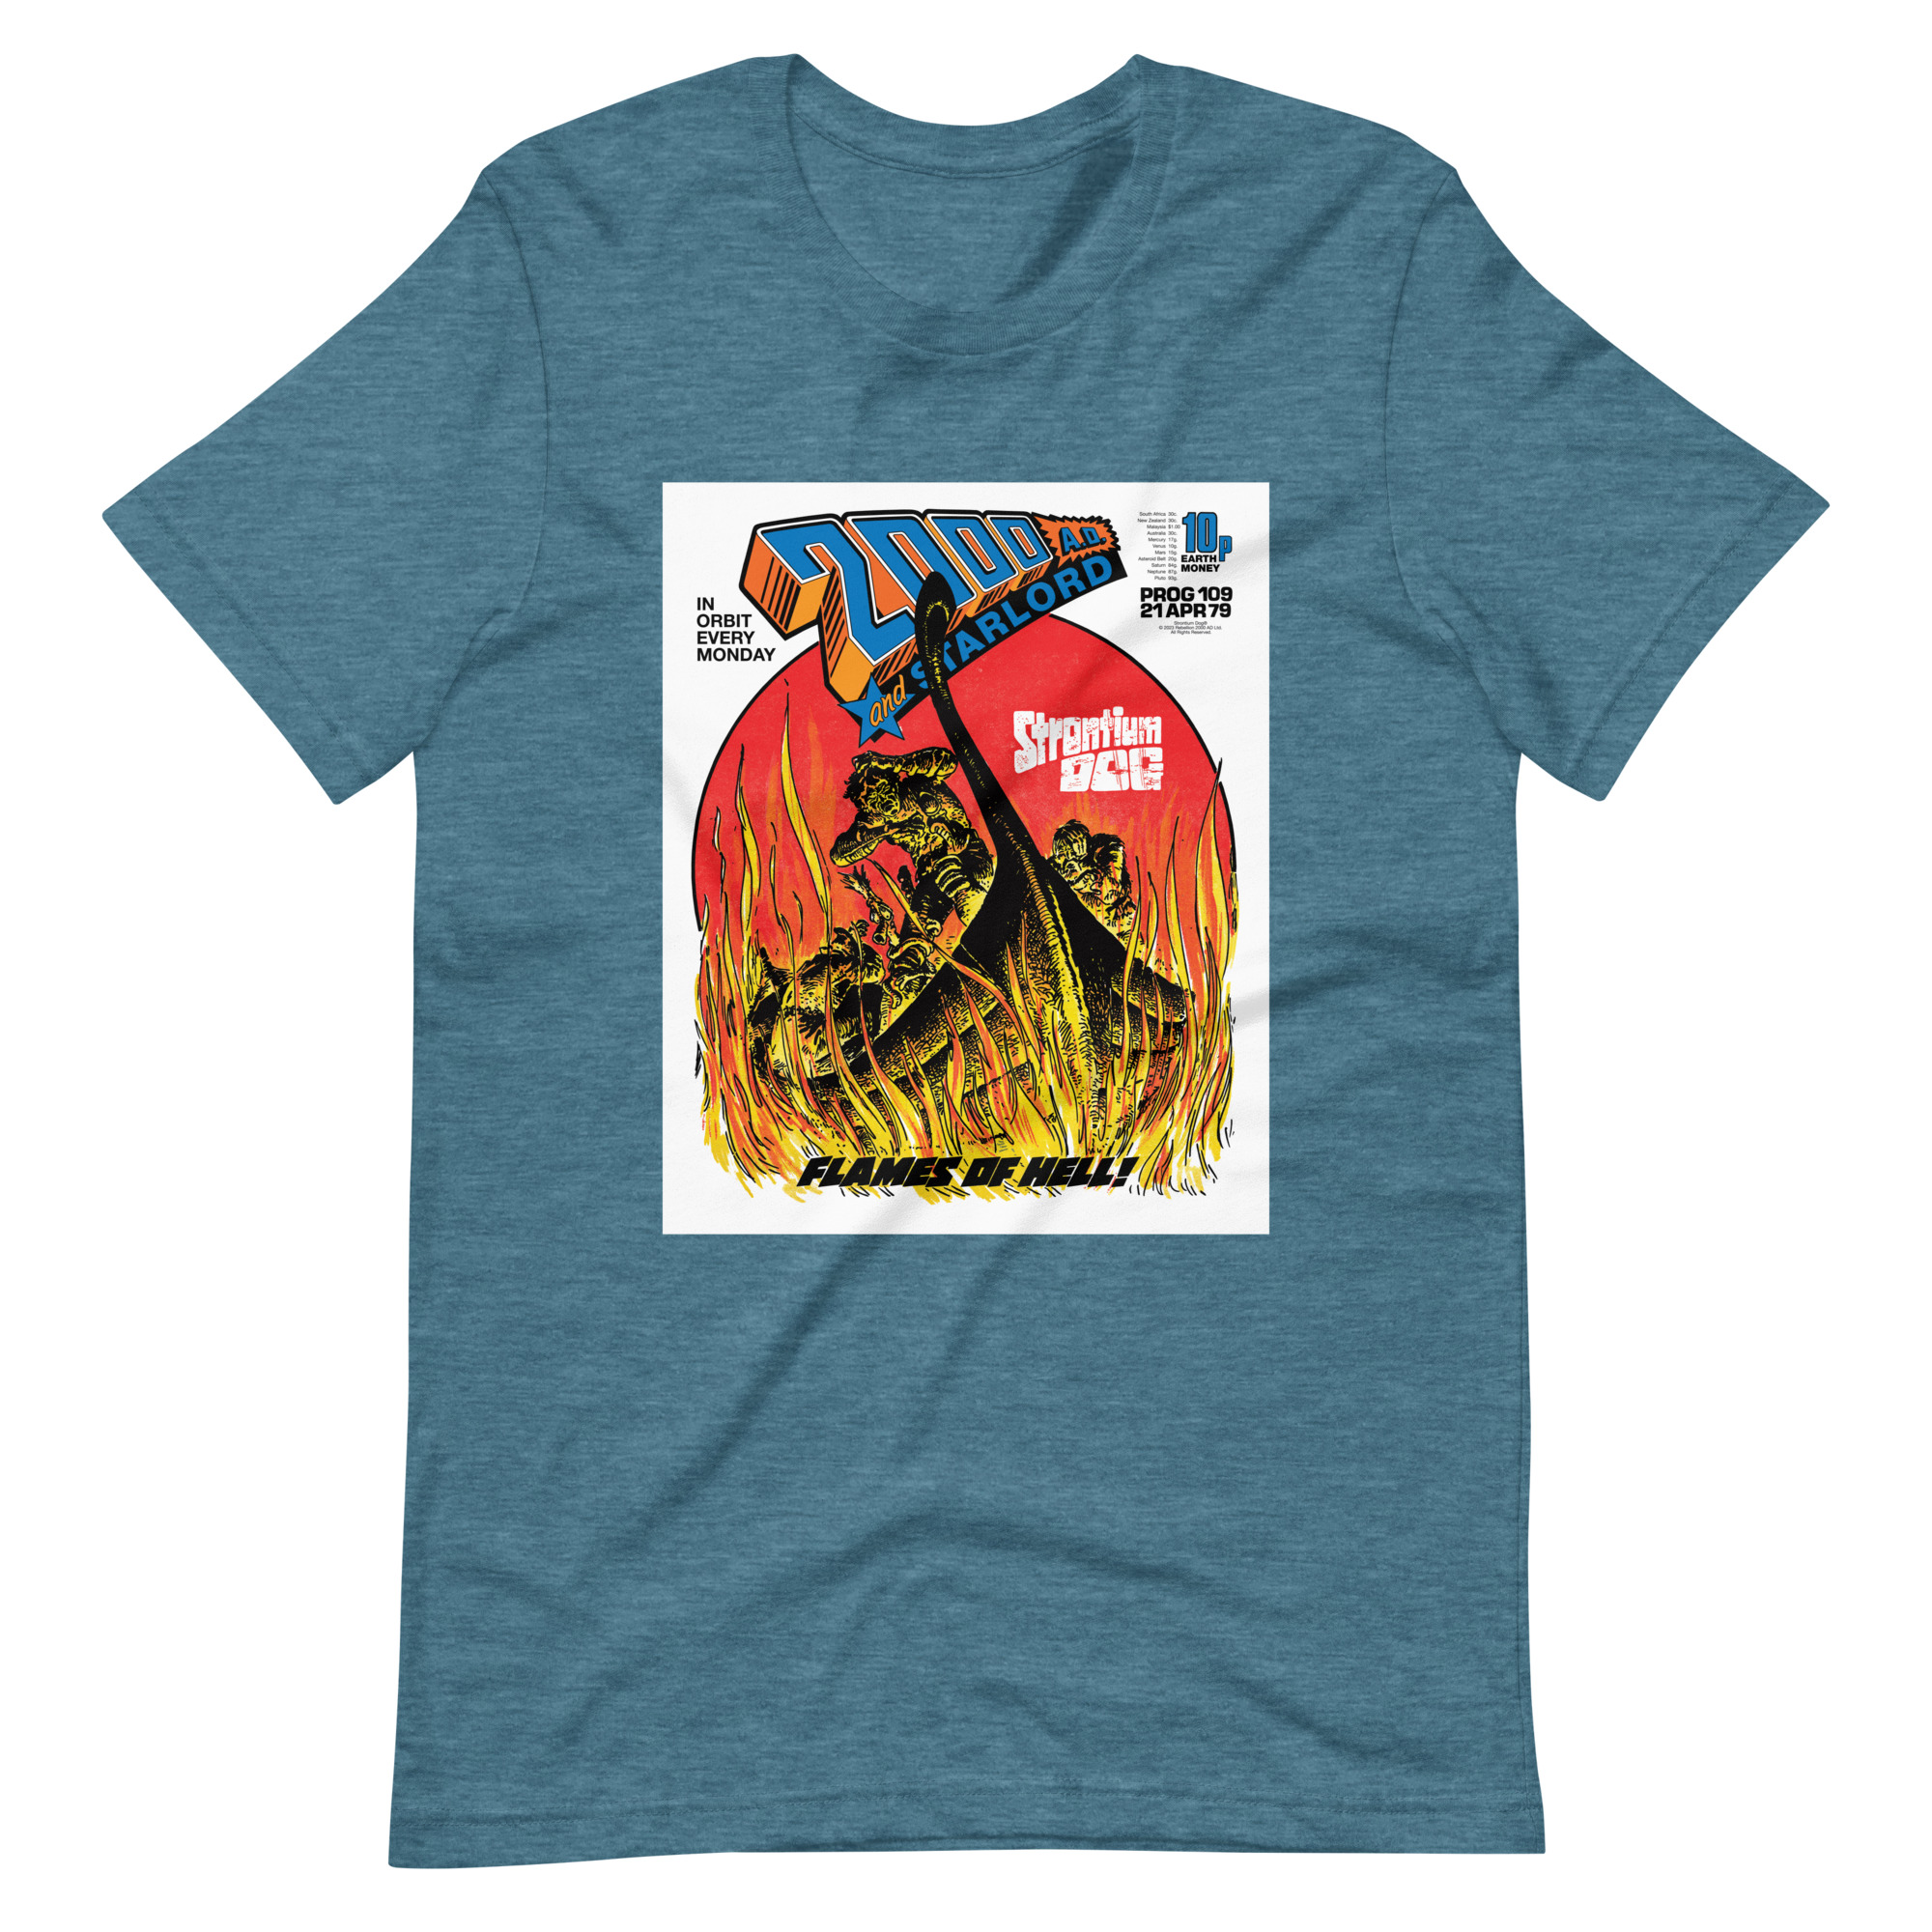 Teal Tshirt with an image on the chest. Image is cover of 2000 AD Prog 109 and shows a viking ship wreathed in flames